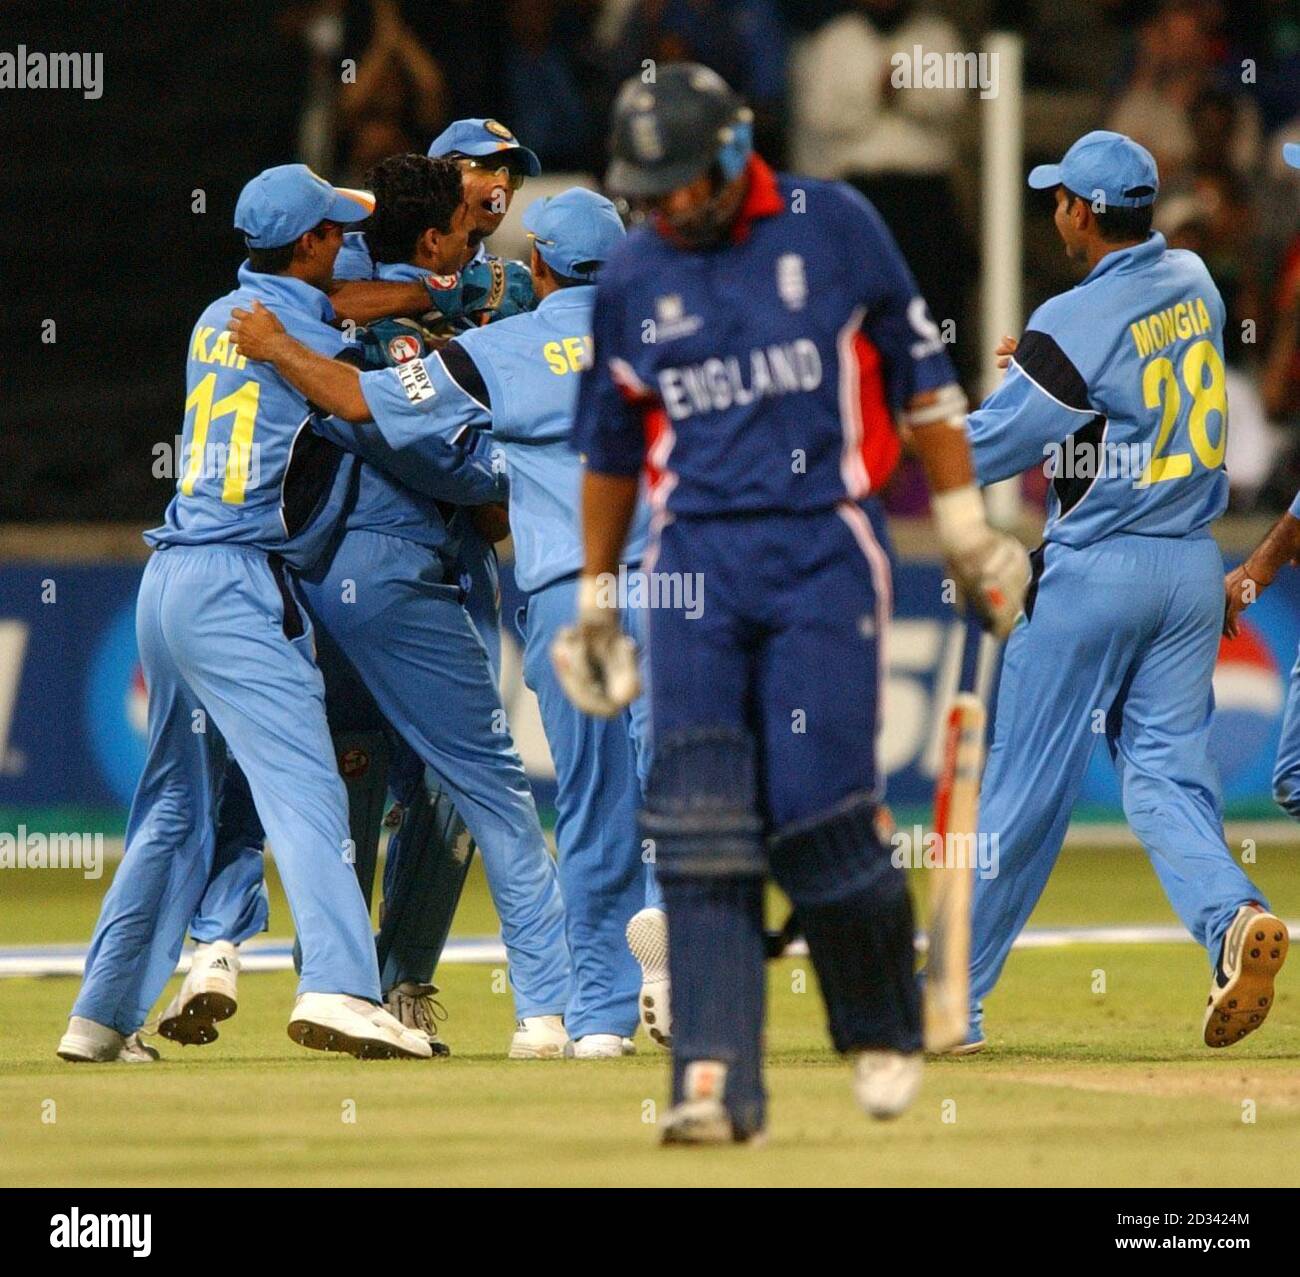 EDITORIAL USE ONLY - NO COMMERCIAL SALES: The Indian team celebrate after  England captain Nasser Hussain was caught by Rahul Dravid for 15 runs off  the bowling of Ashish Nehra during their